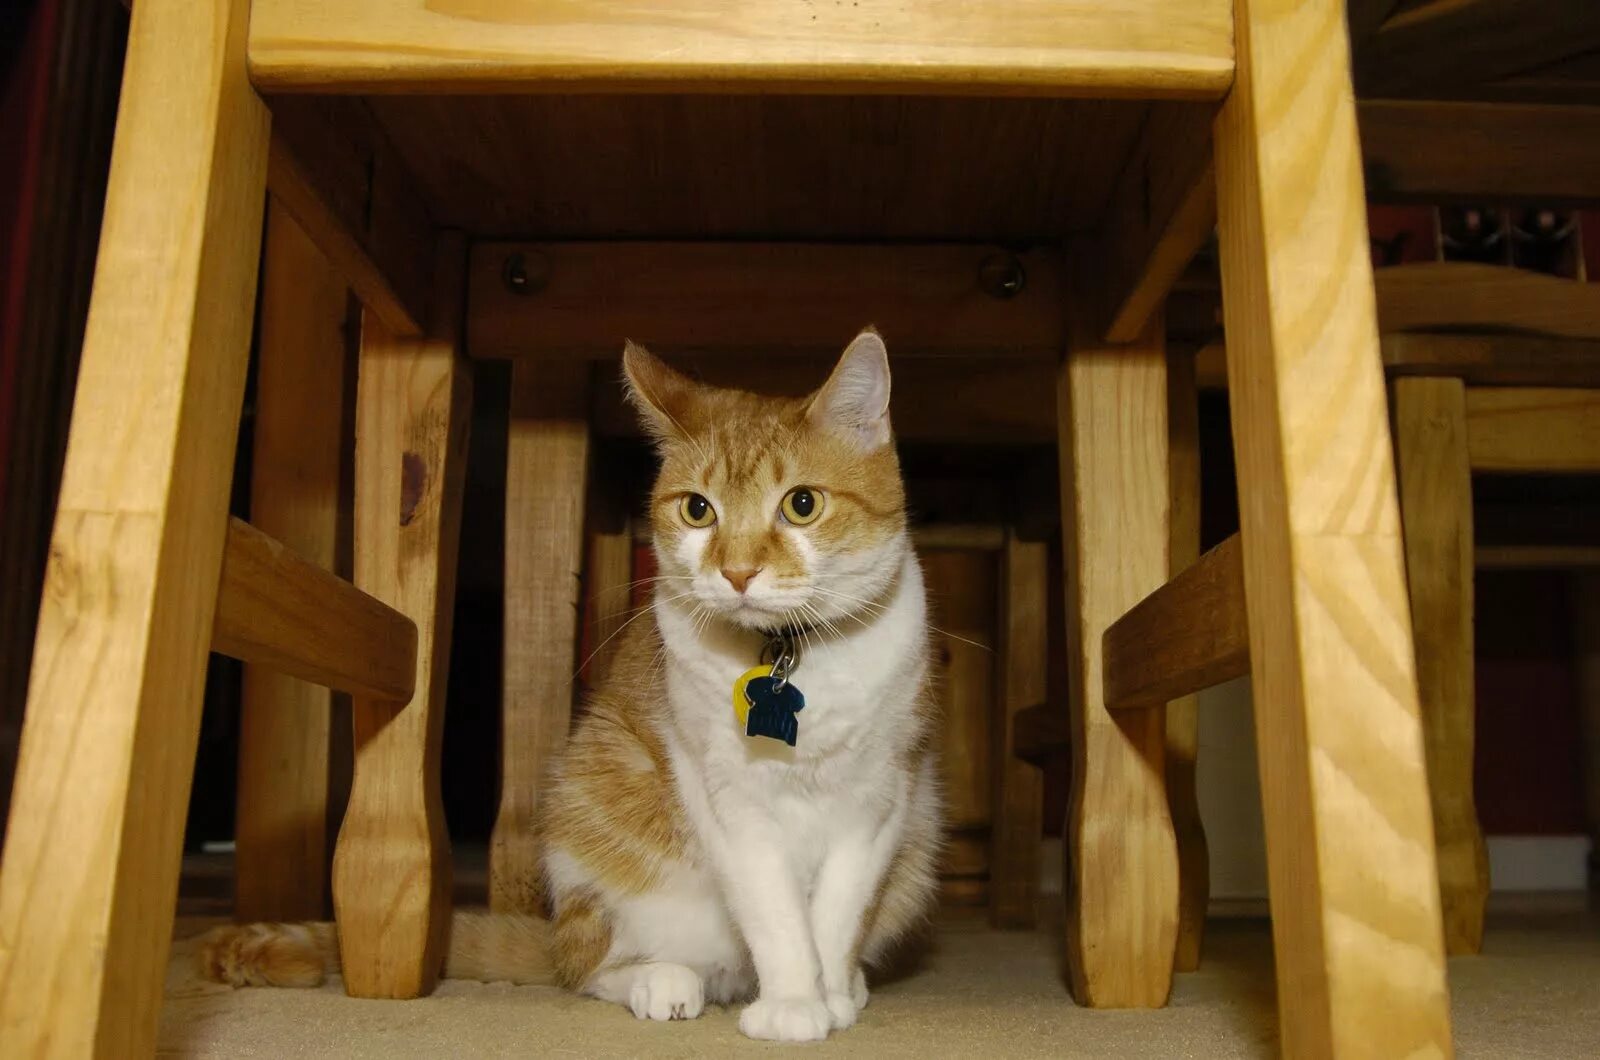 Cat under the Table. Cat under the Box. Cat is under. Under. The cat is the chair